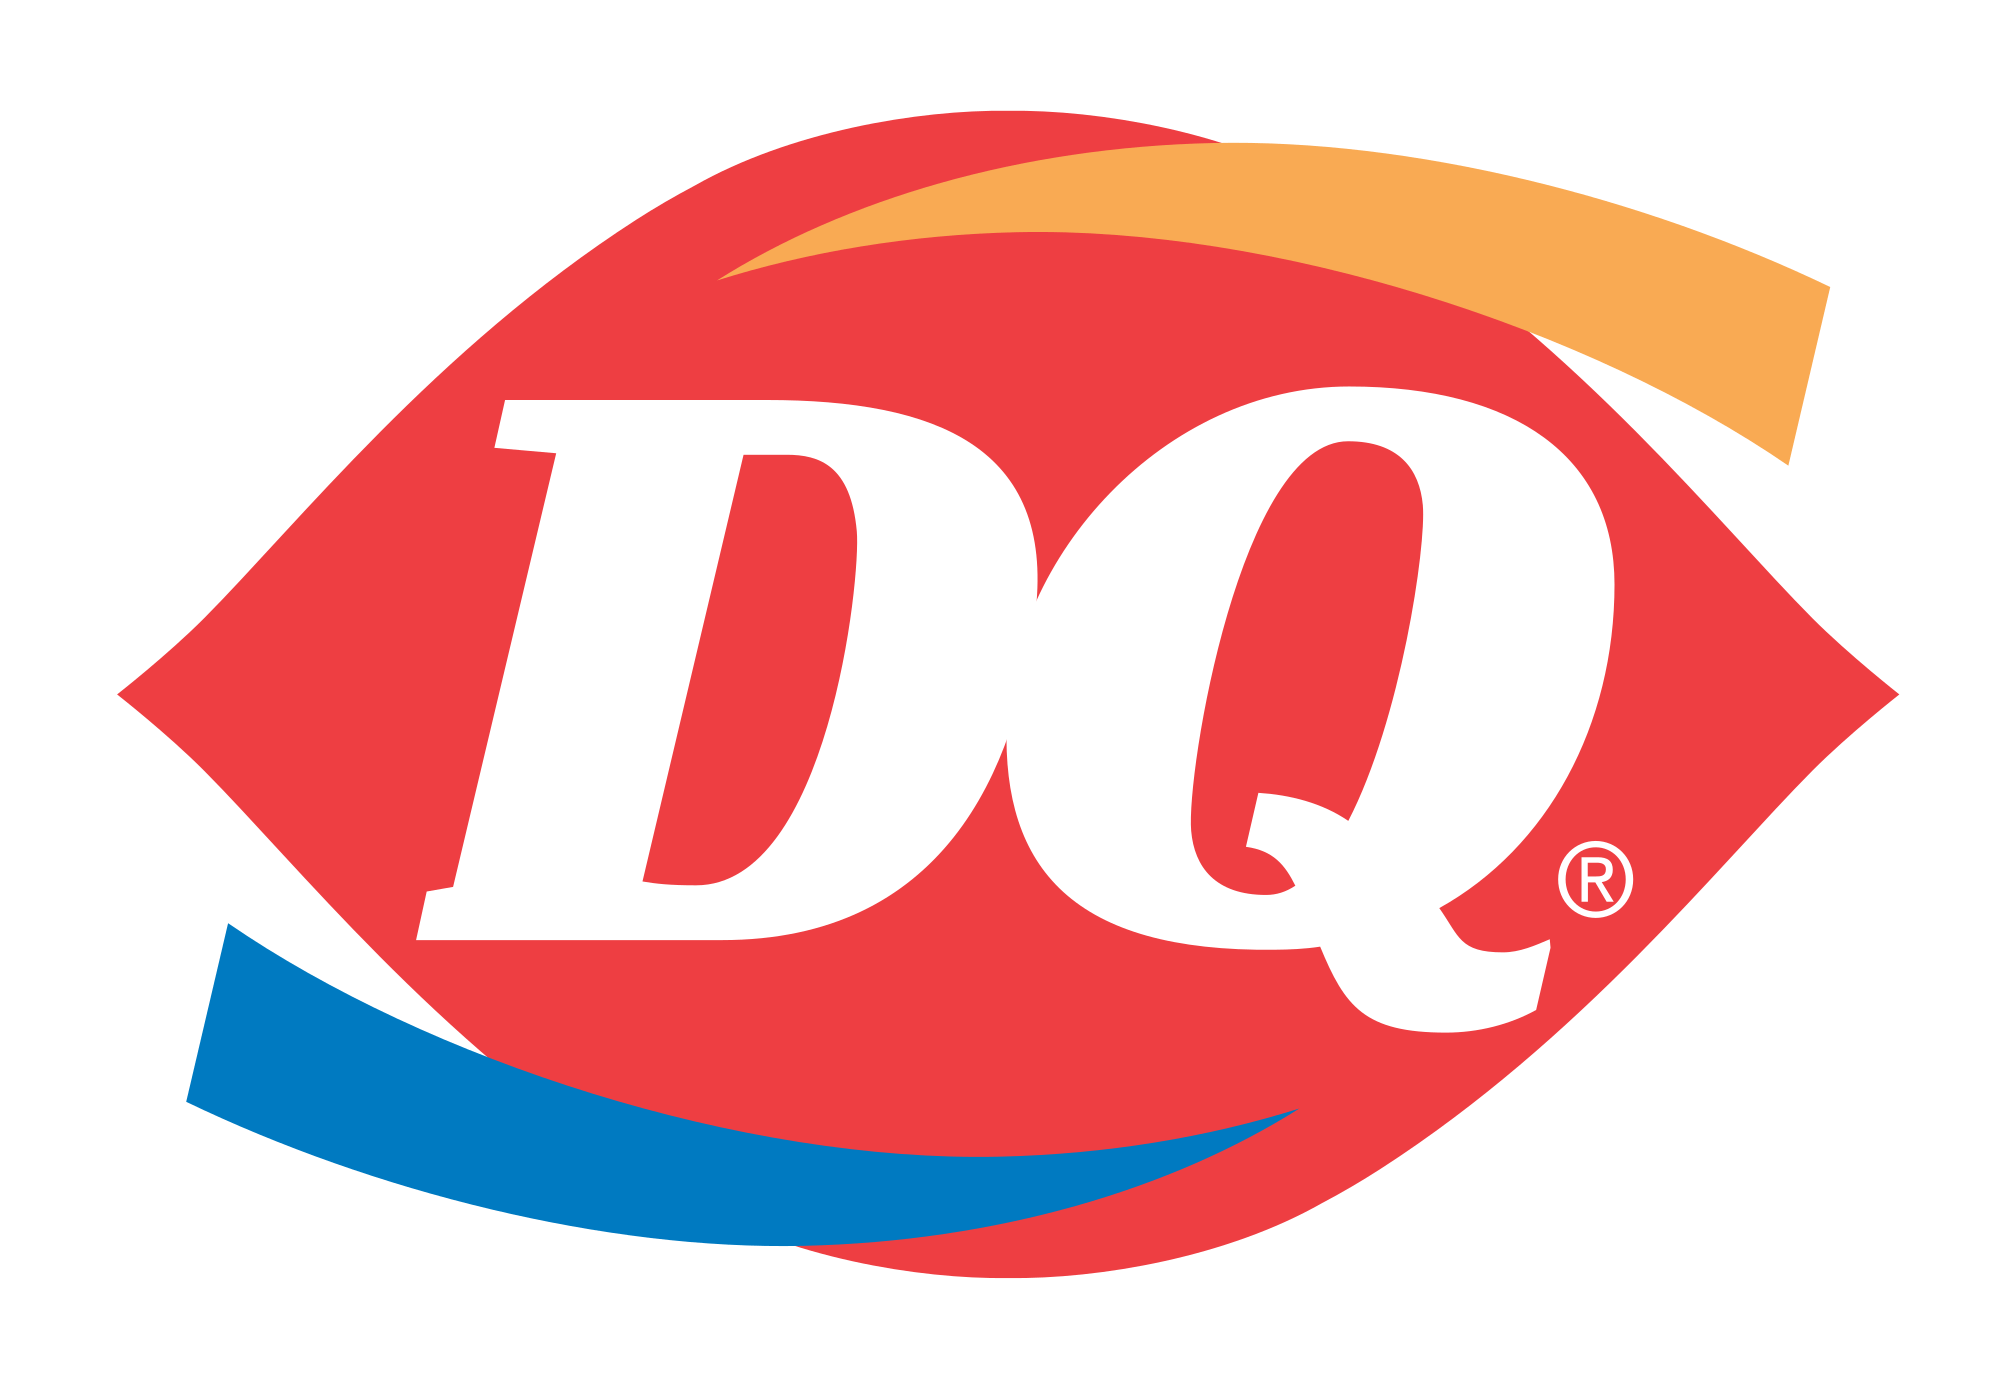 Only with Red N Logo - Dairy Queen